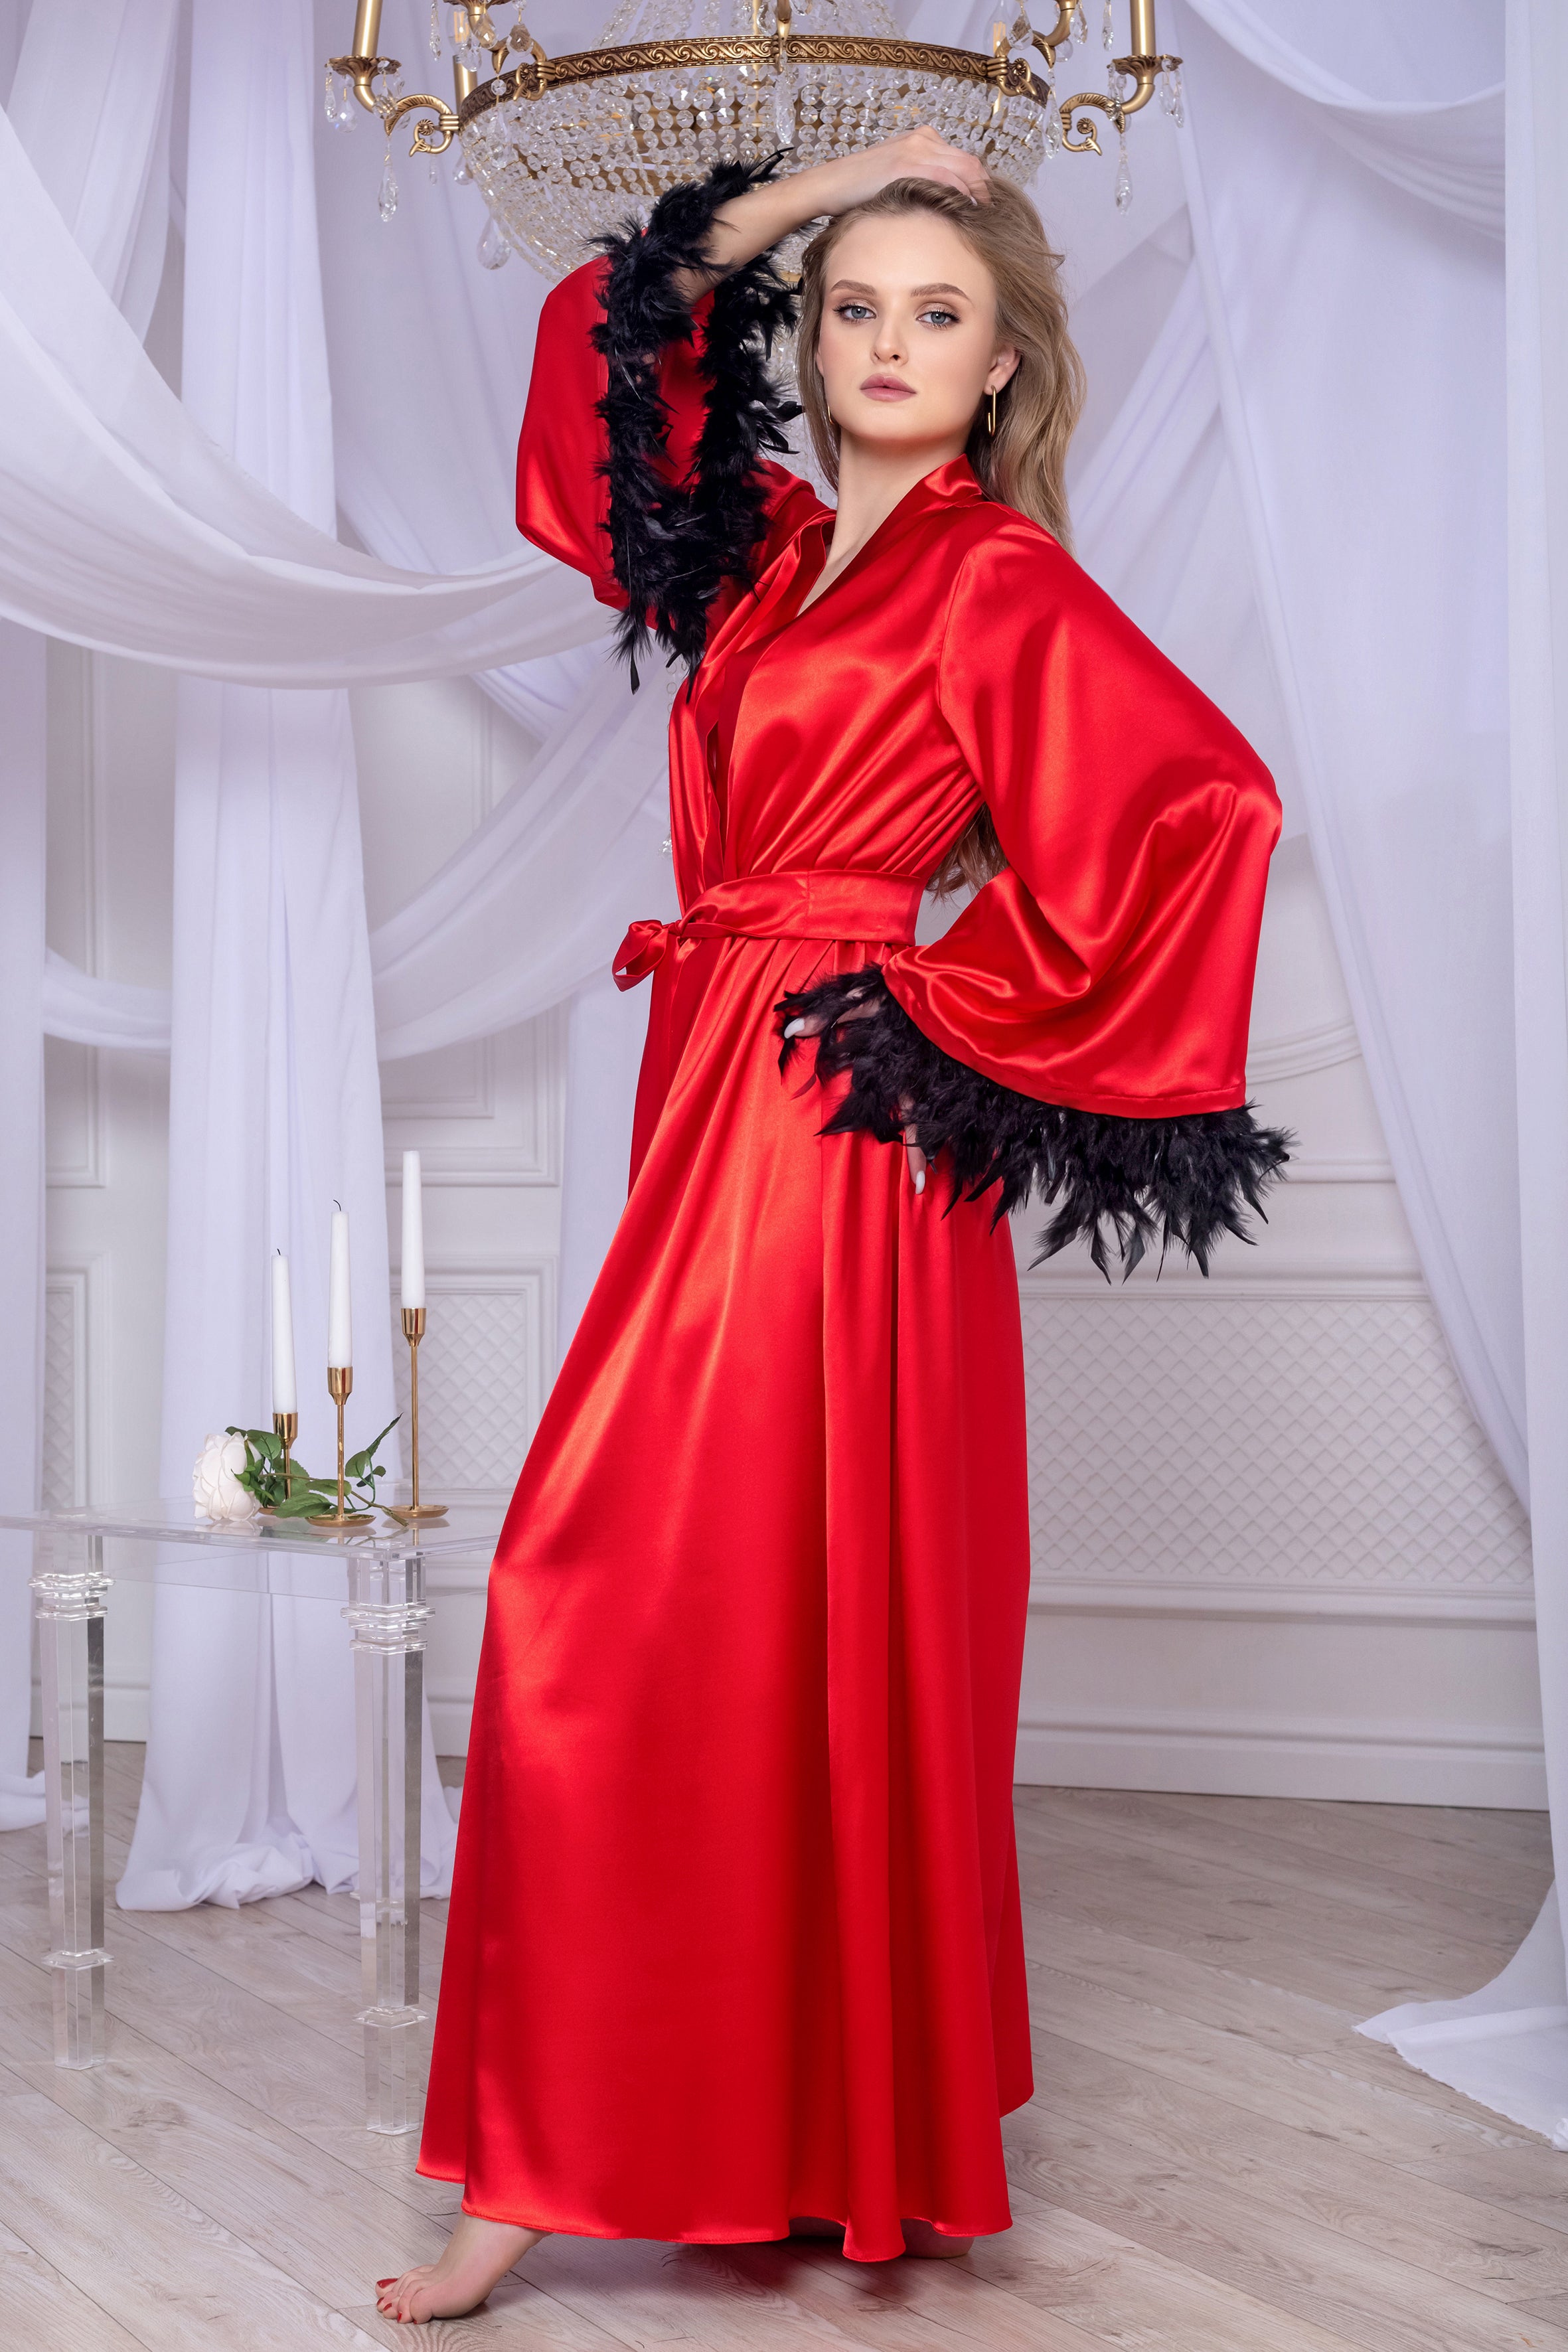 Feather trimmed boudoir robe Red satin